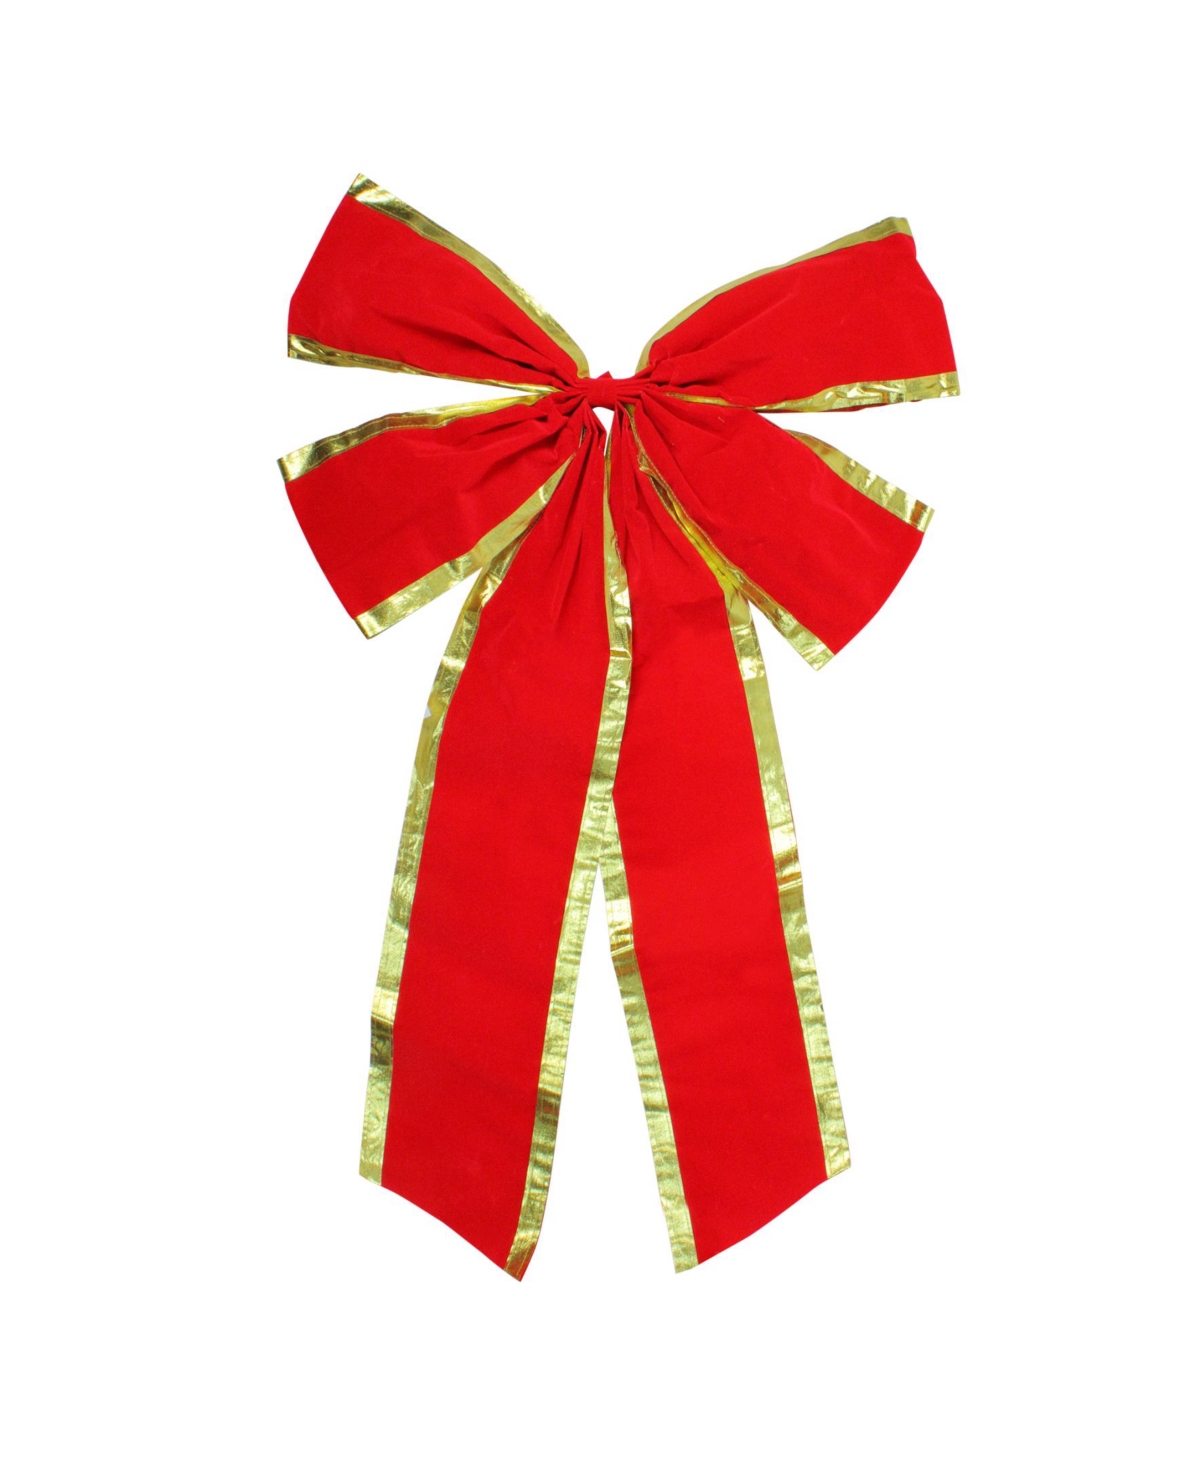 4-Loop Velveteen Christmas Bow with Trim - Red